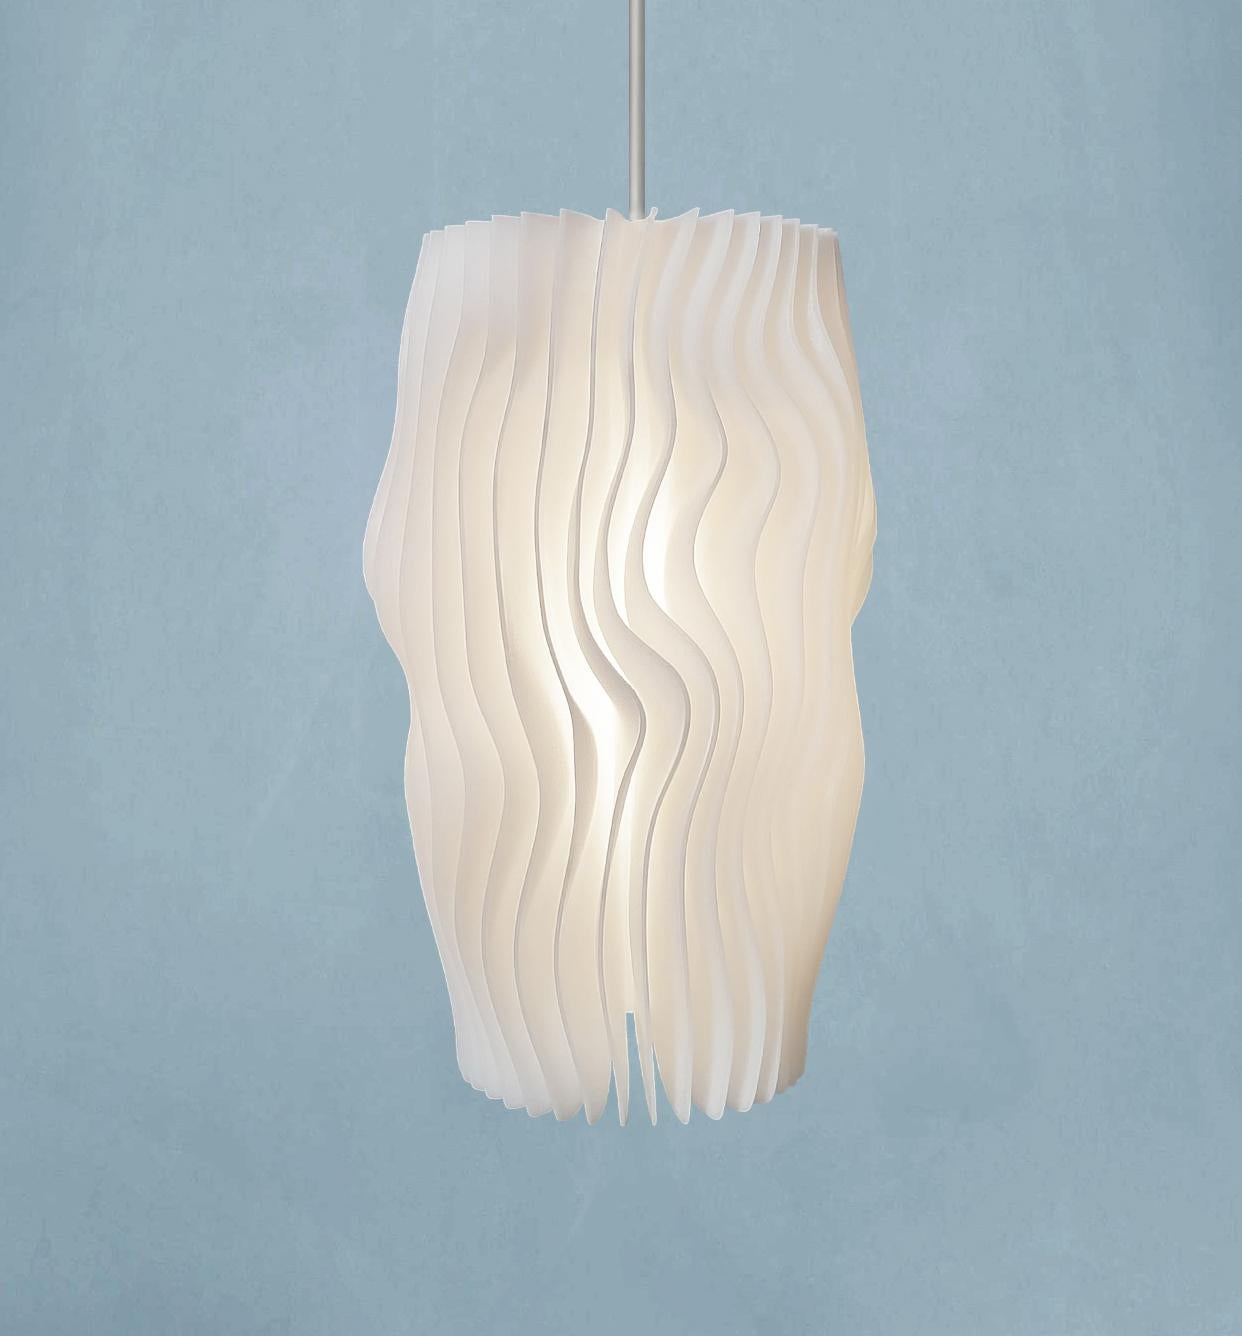 This object is a limited edition (1/330) Swiss Design pendant lamp from the first Glacier series - inspired by the organic shape of glacial ice layers - brand new in the box with certificate and International Lifetime Warranty, several consecutively